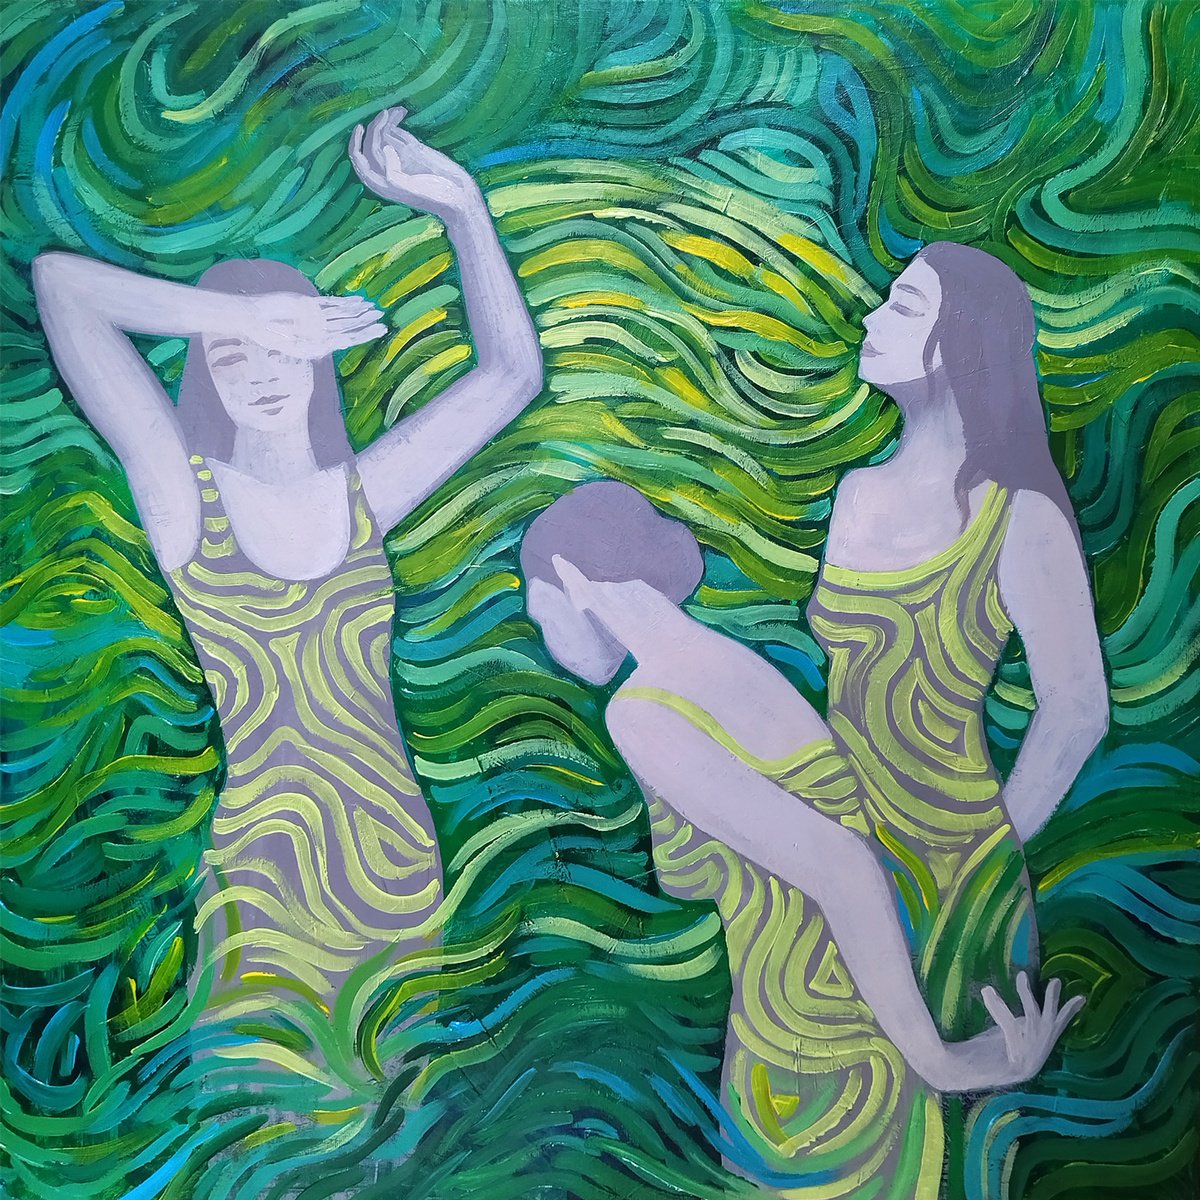 MOVEMENT - DANCING FEMALE FIGURES ON A GREEN BACKGROUND by Ekaterina Prisich